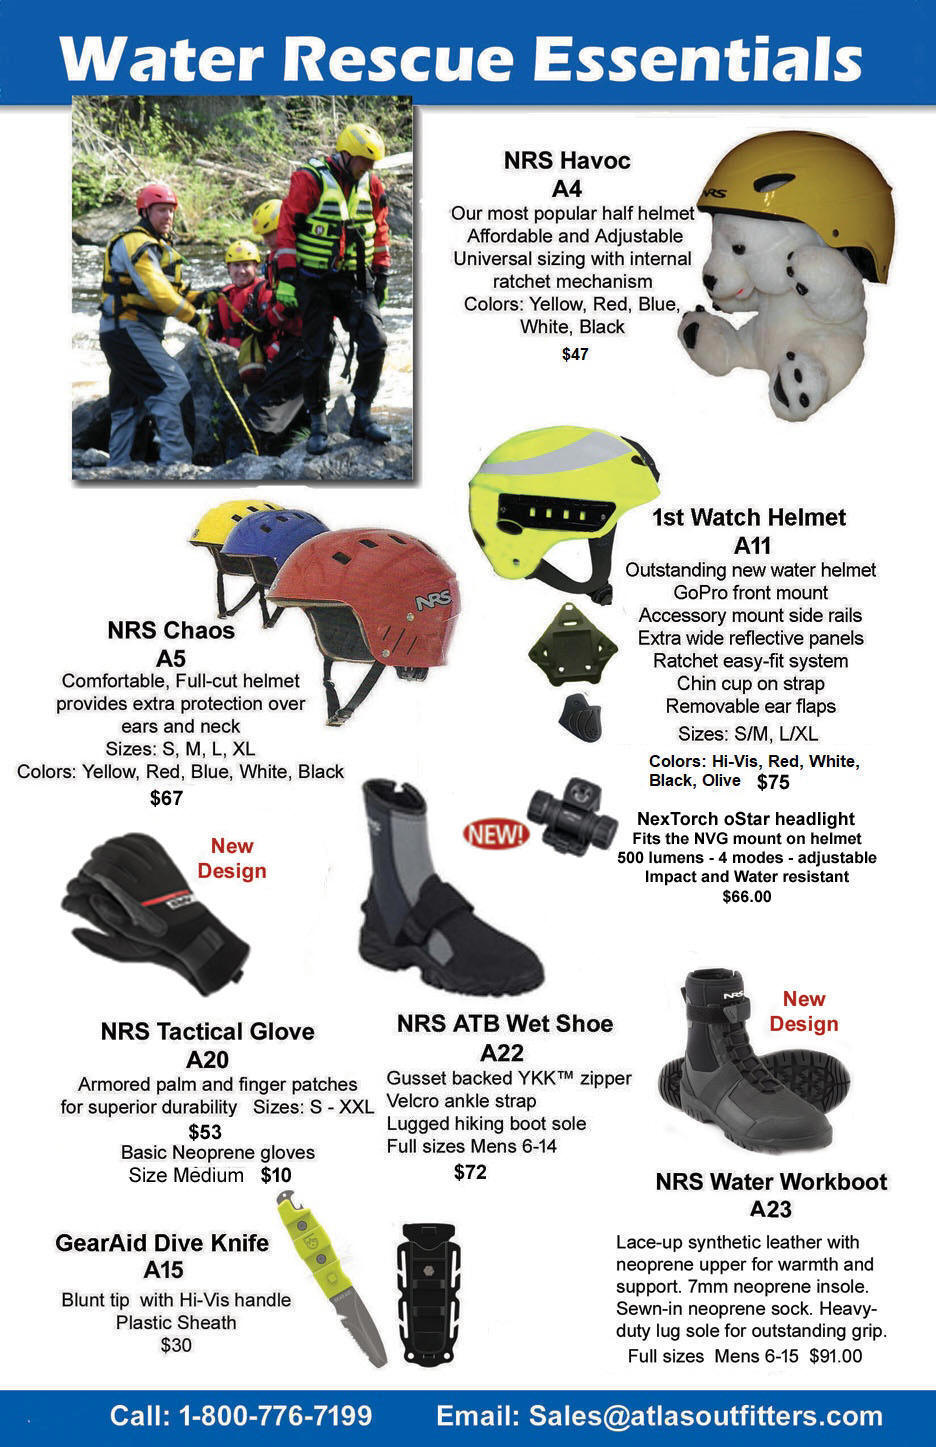 Water rescue helmets, boots and gloves